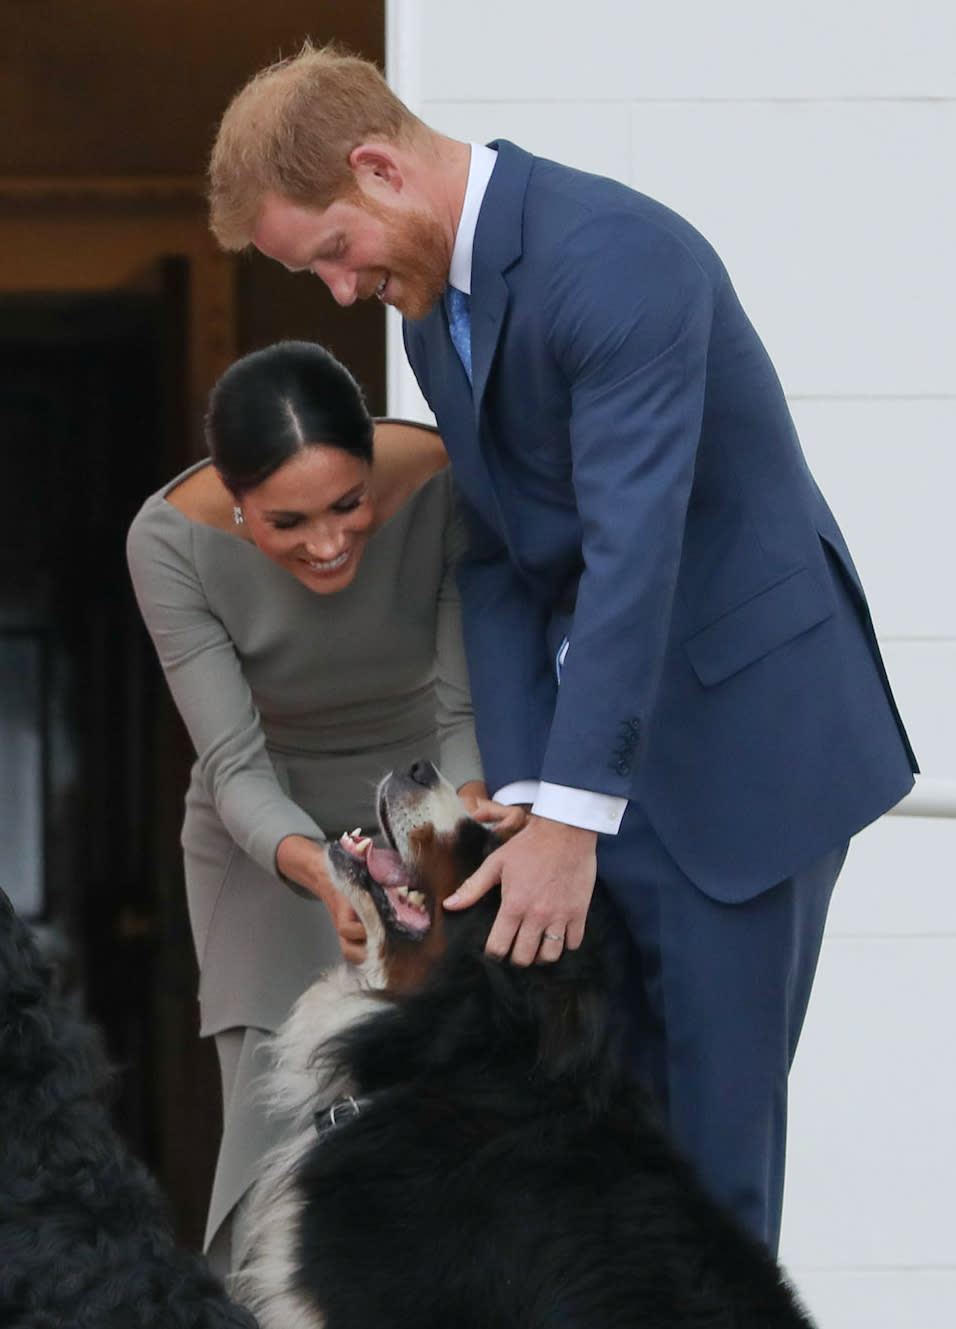 Britain's Prince Harry (R) and wife Meghan (2R), Duke and Duchess of Sussex greet the dogs of Ireland's President Michael Higgins and wife Sabina on arrival at the Presidential mansion on the second day of their visit in Dublin on July 11, 2018. (Photo by MAXWELLS / POOL / AFP)        (Photo credit should read MAXWELLS/AFP/Getty Images)